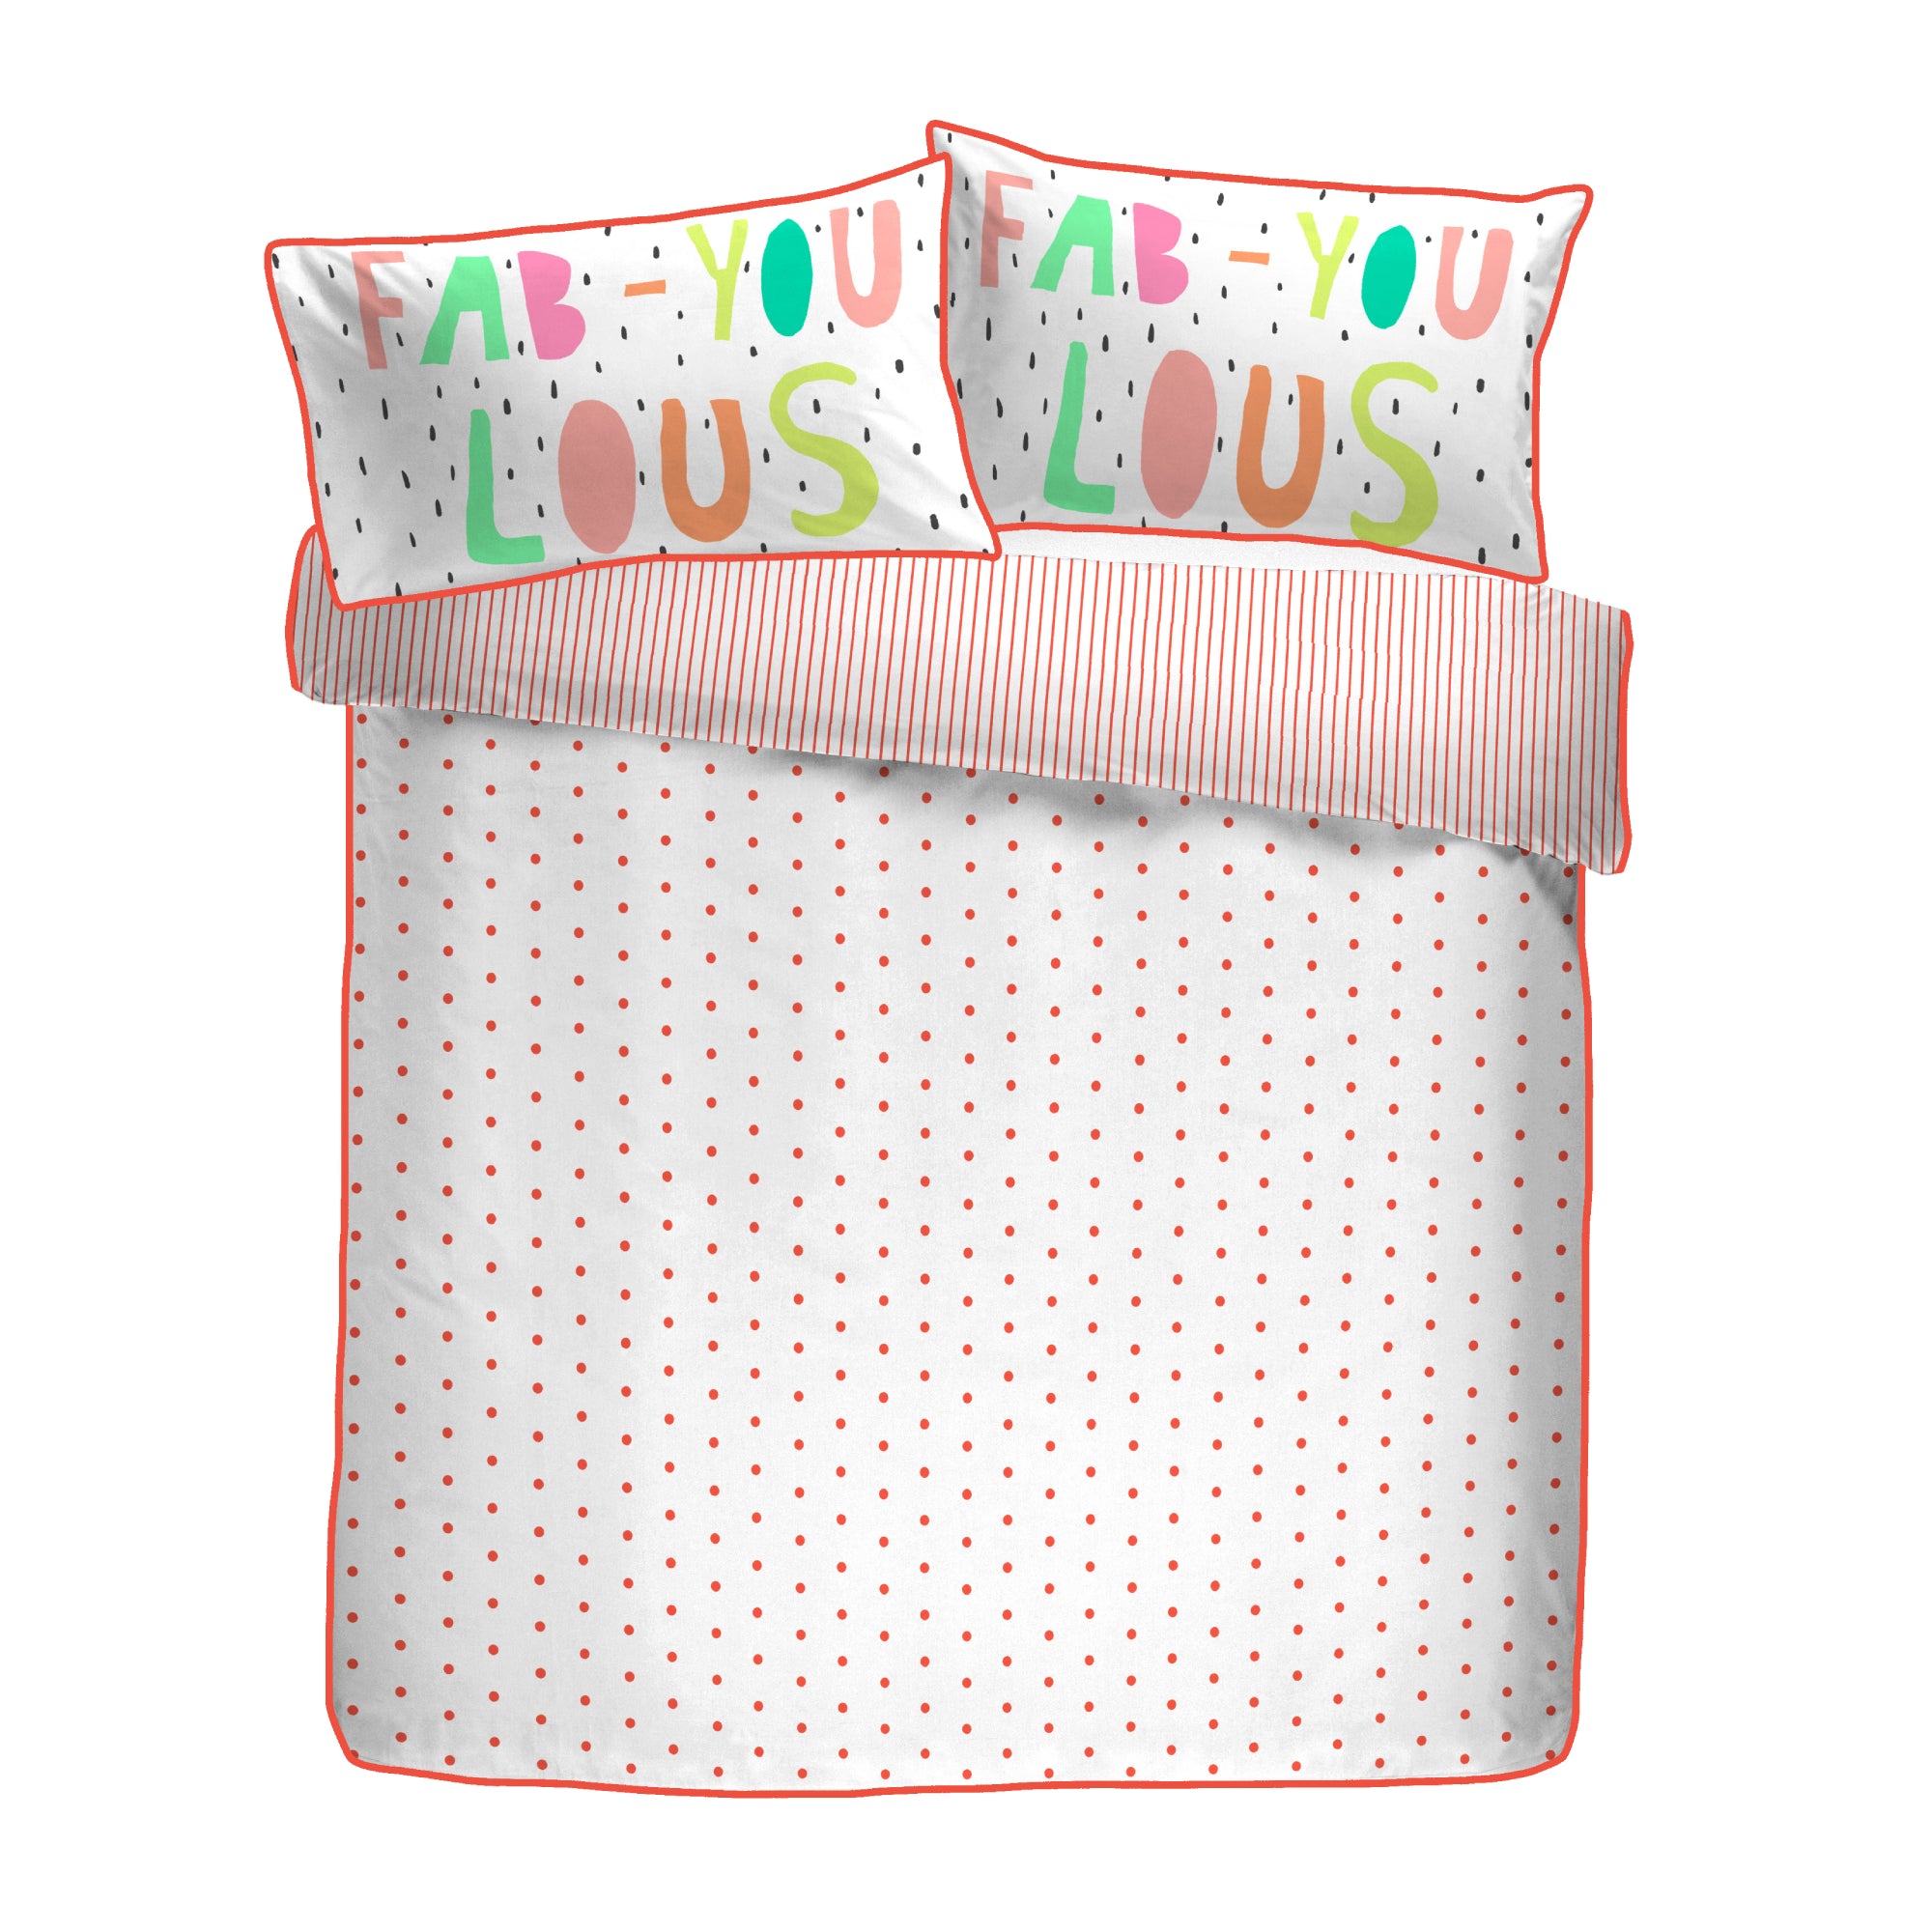 Duvet Cover Set Tilly Spot by Appletree Kids in Coral